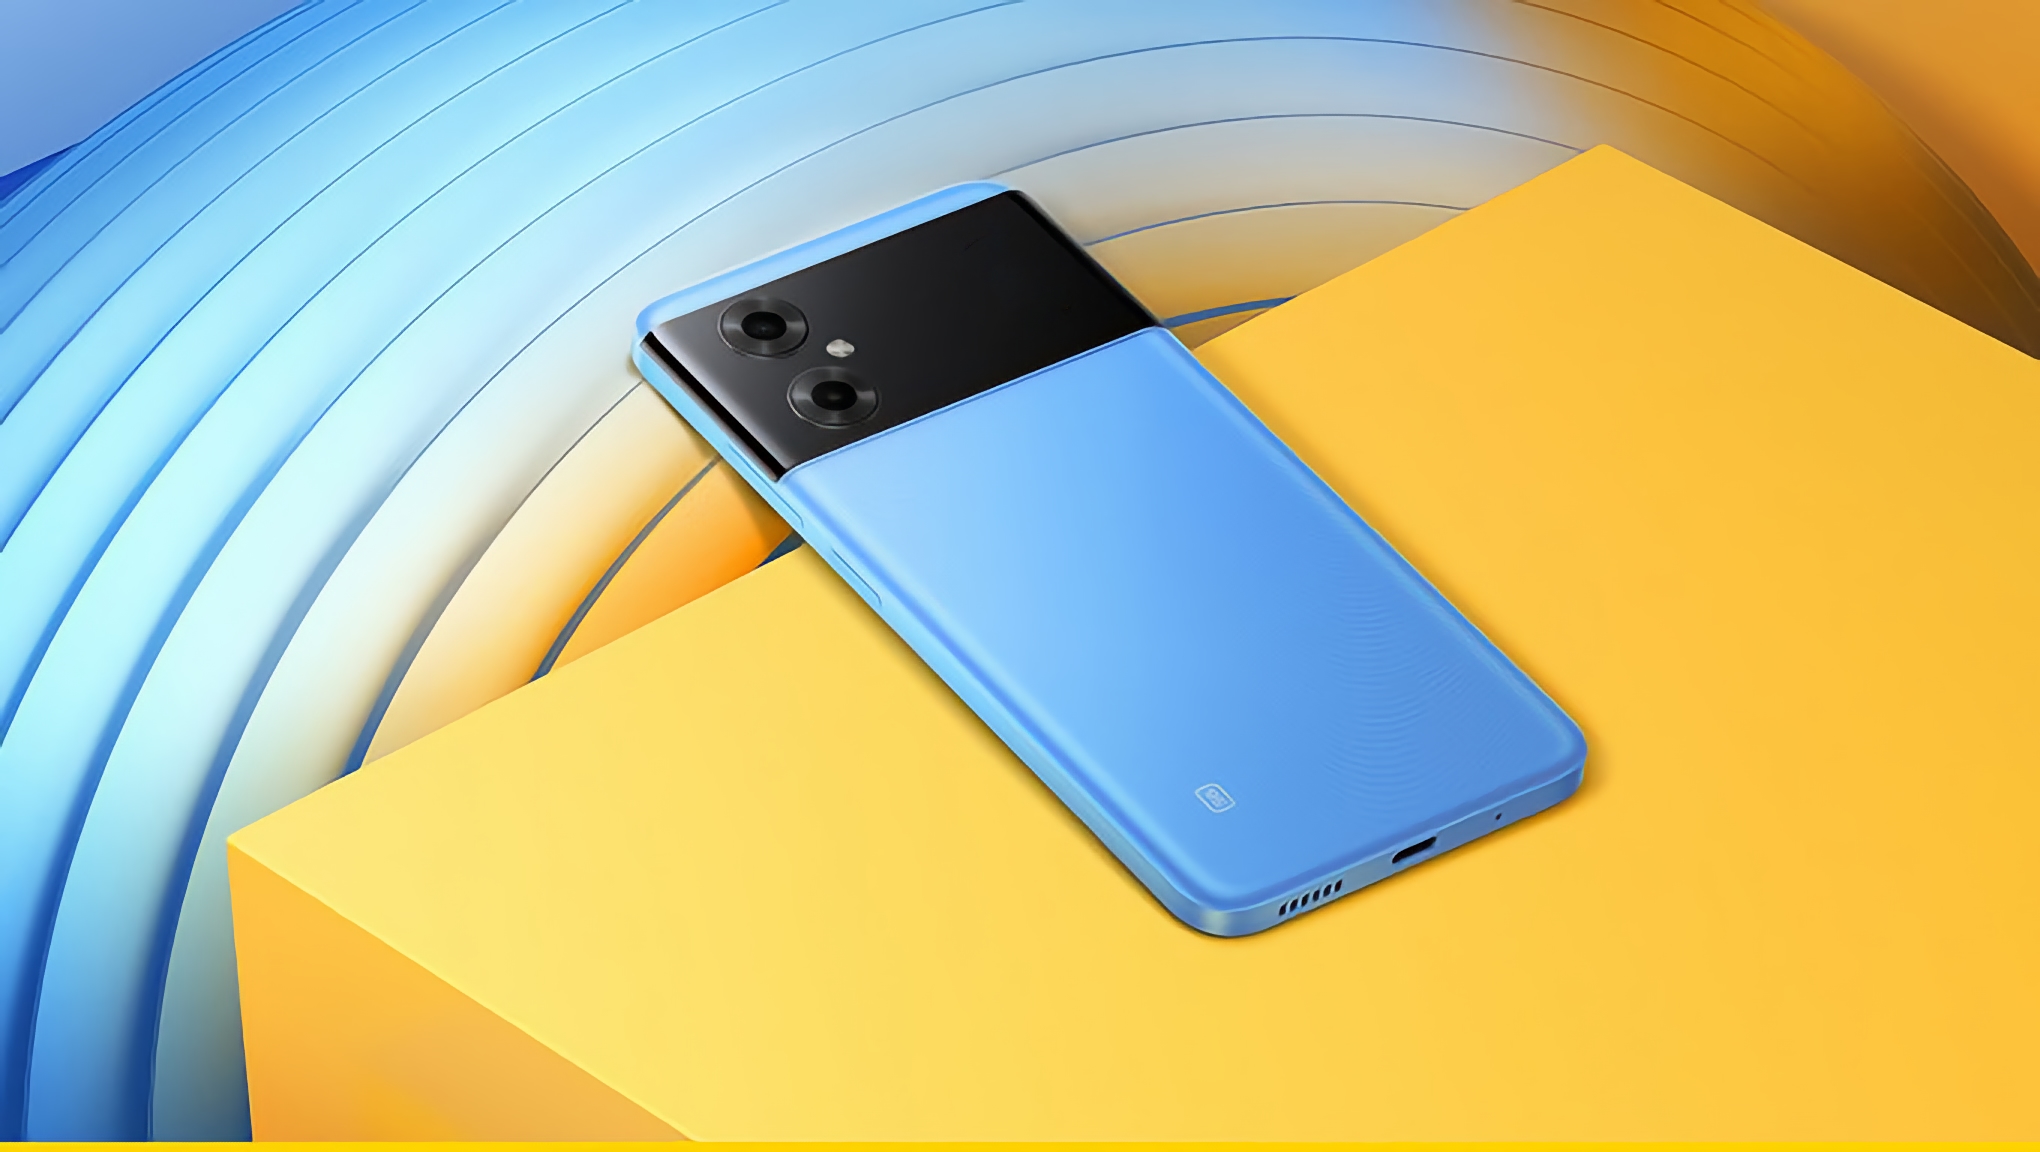 Redmi Note 11R - Dimensity 700, 90Hz display, 50MP camera and MIUI 13 on Android 12 priced from $180